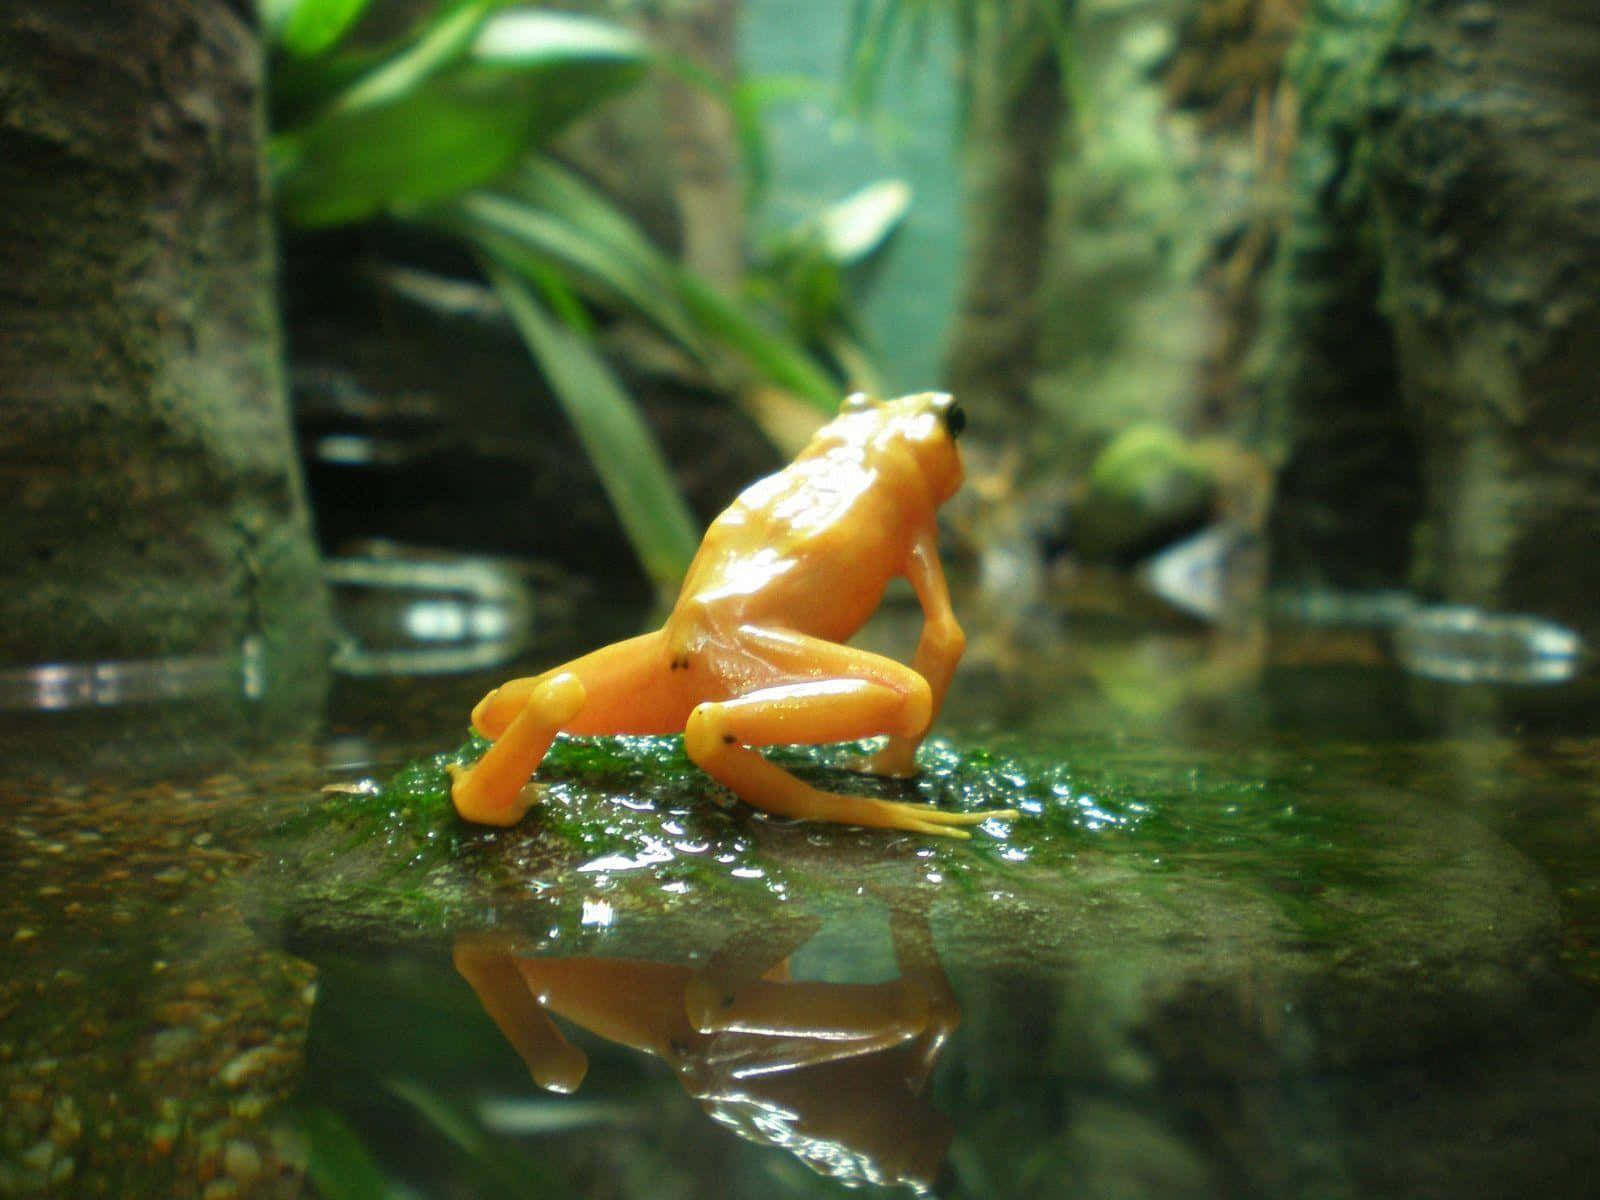 Welcome to the Wonderful World of Frogs!